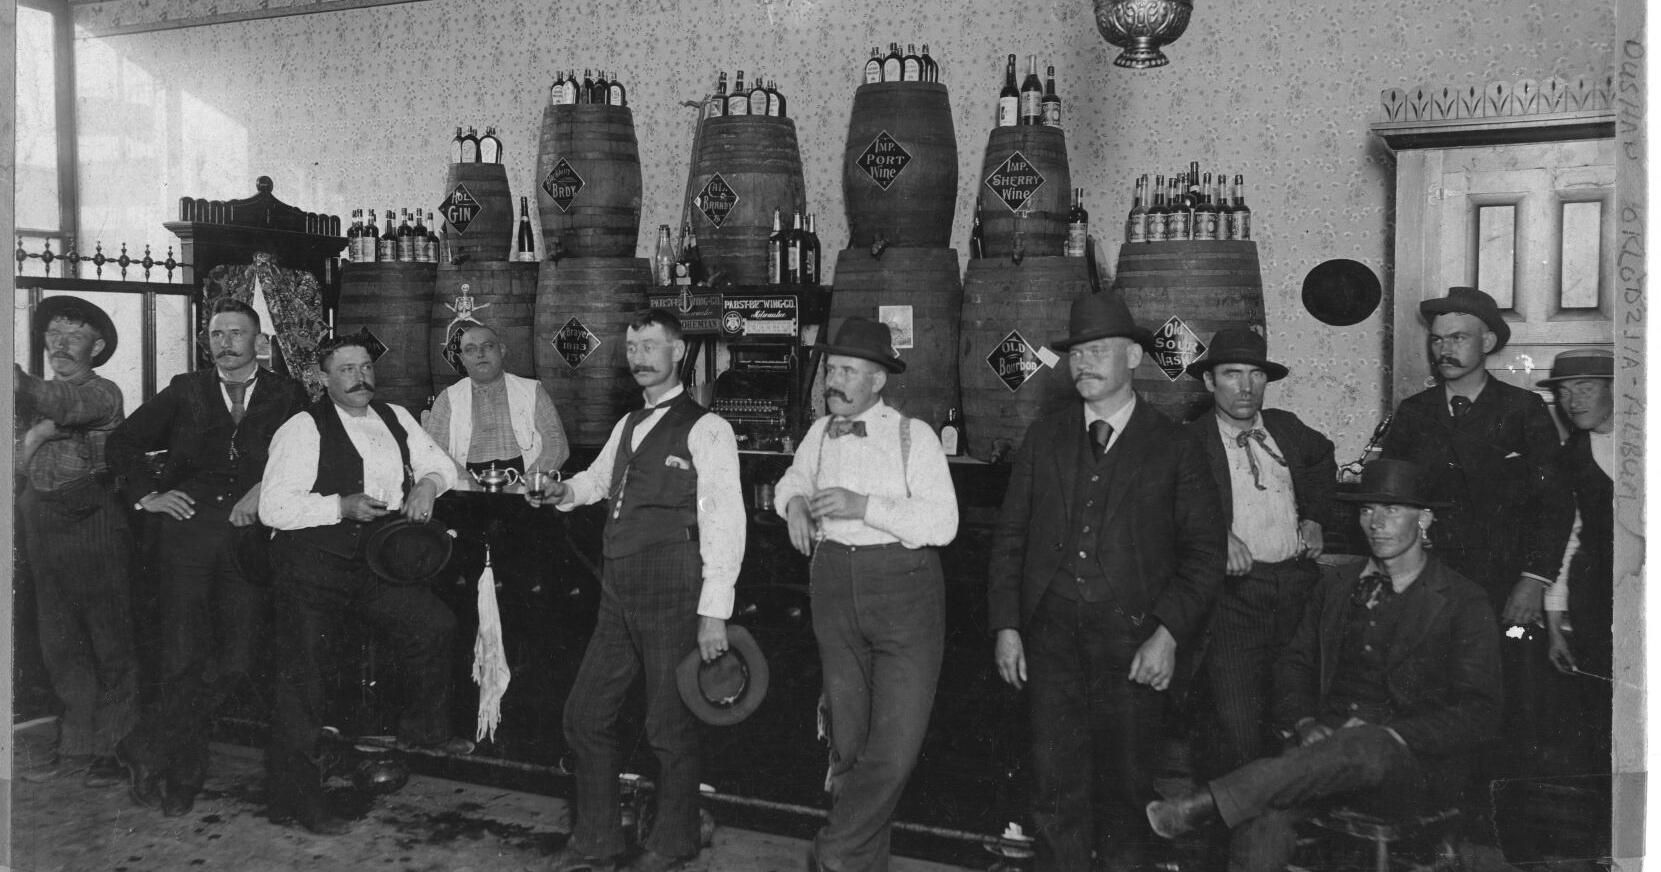 'Never Dry': The Rise of Prohibition on the Iron Range